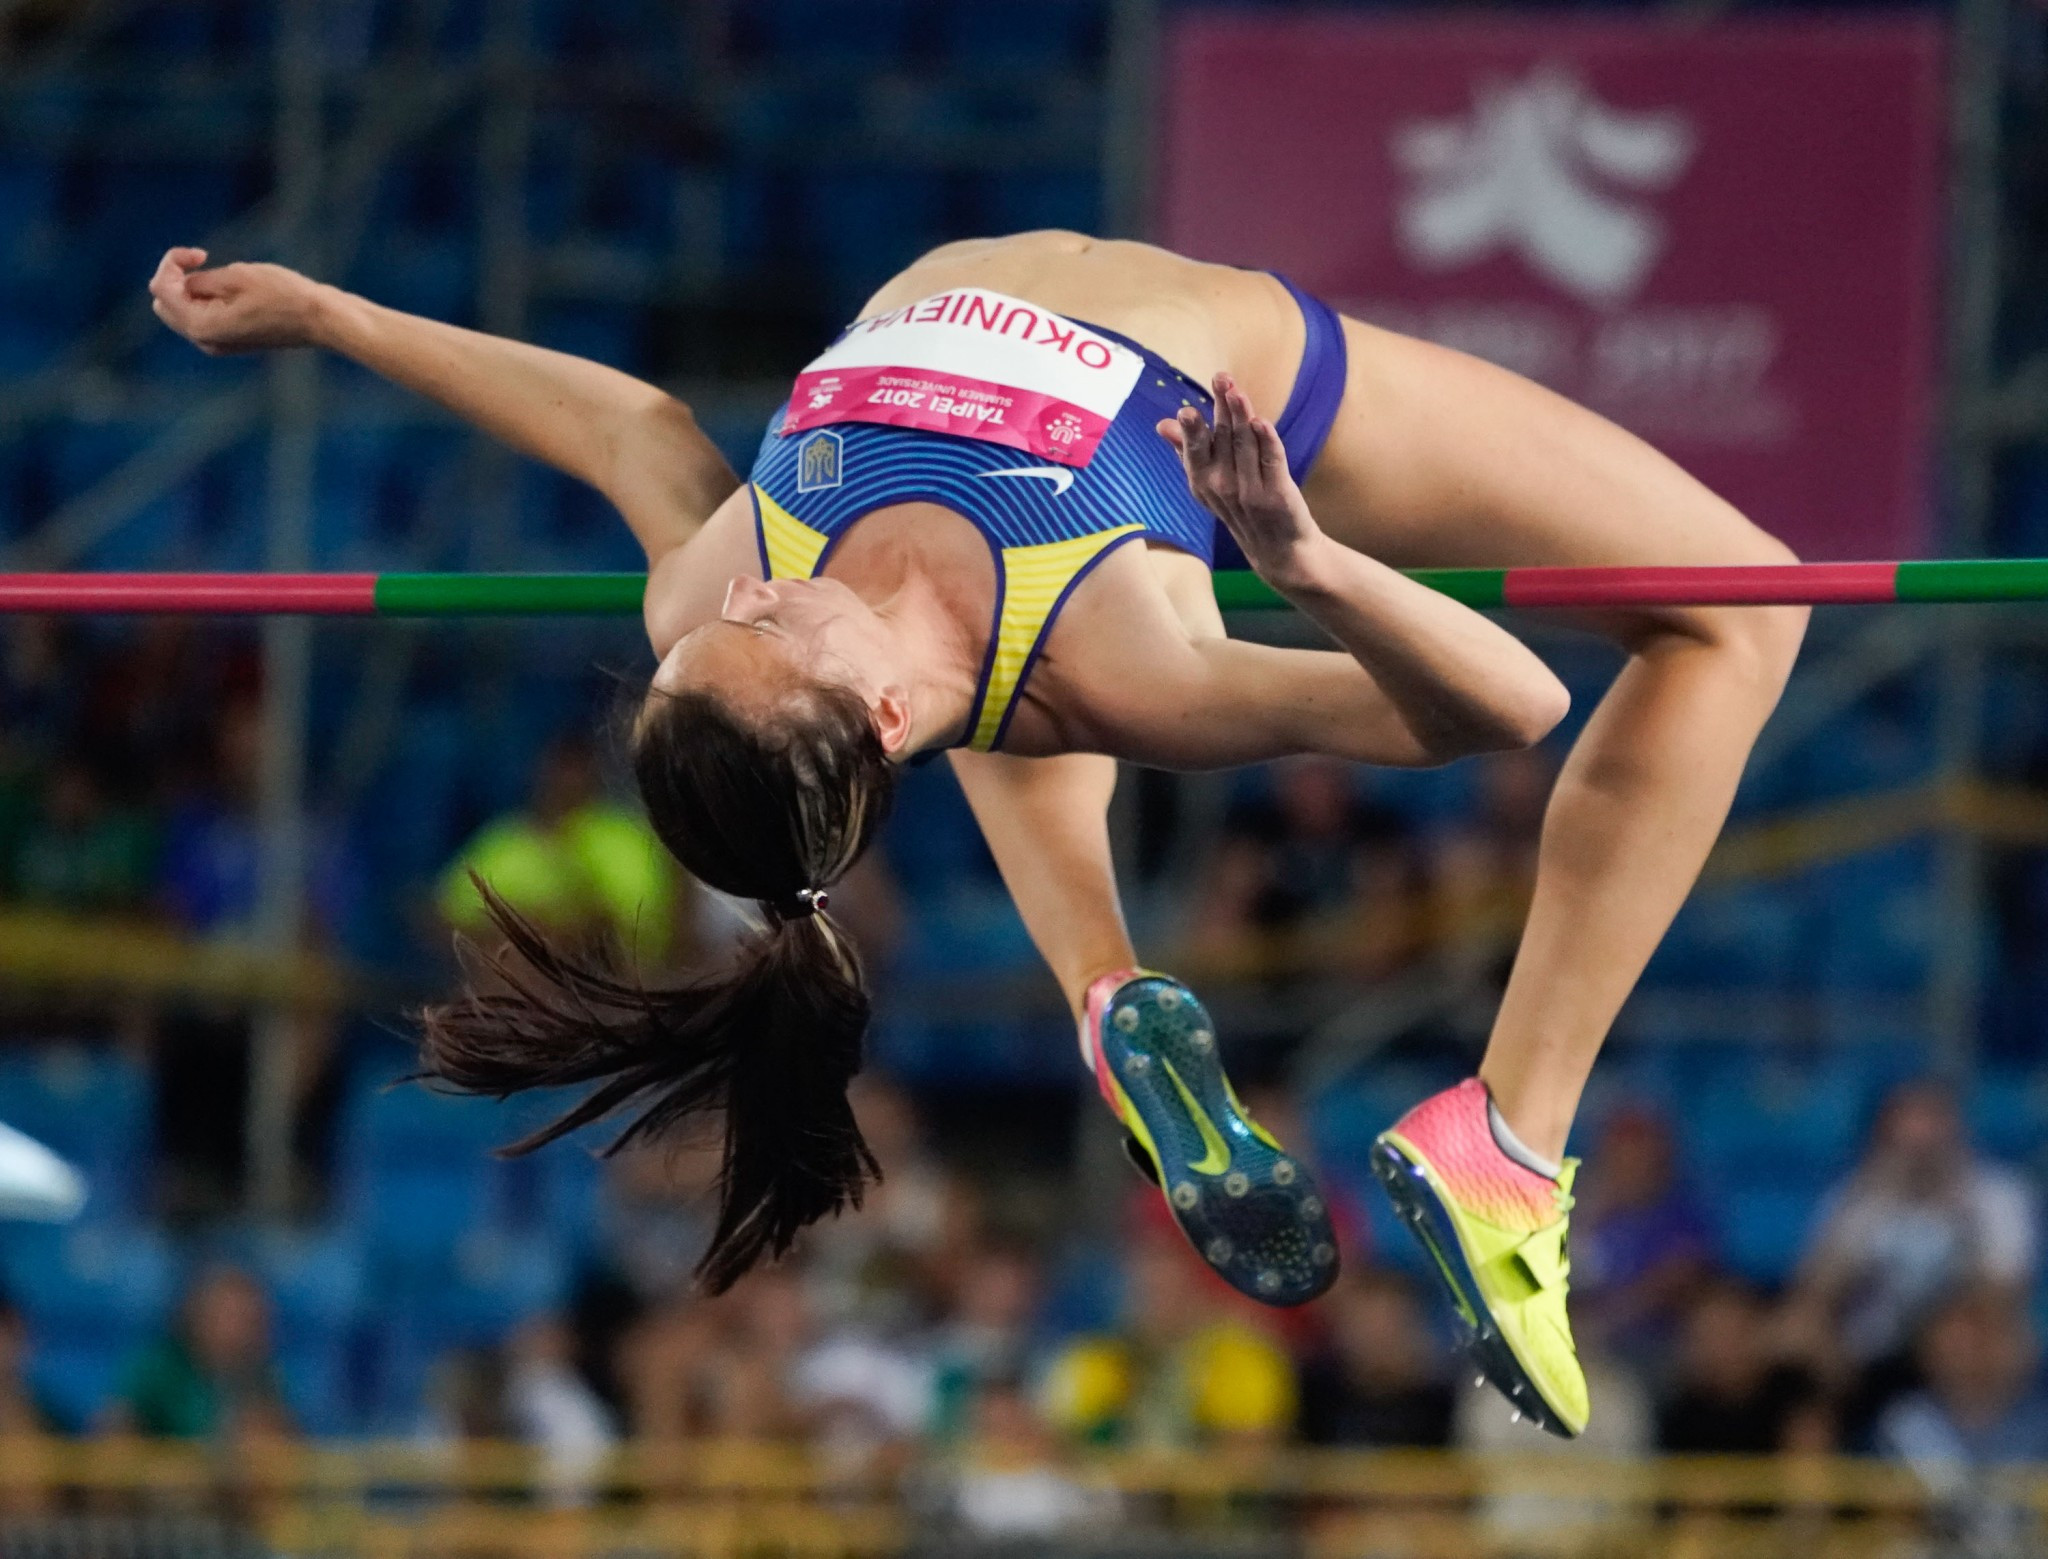 Ukraine earned gold and silver in the women's high jump competition ©Taipei 2017